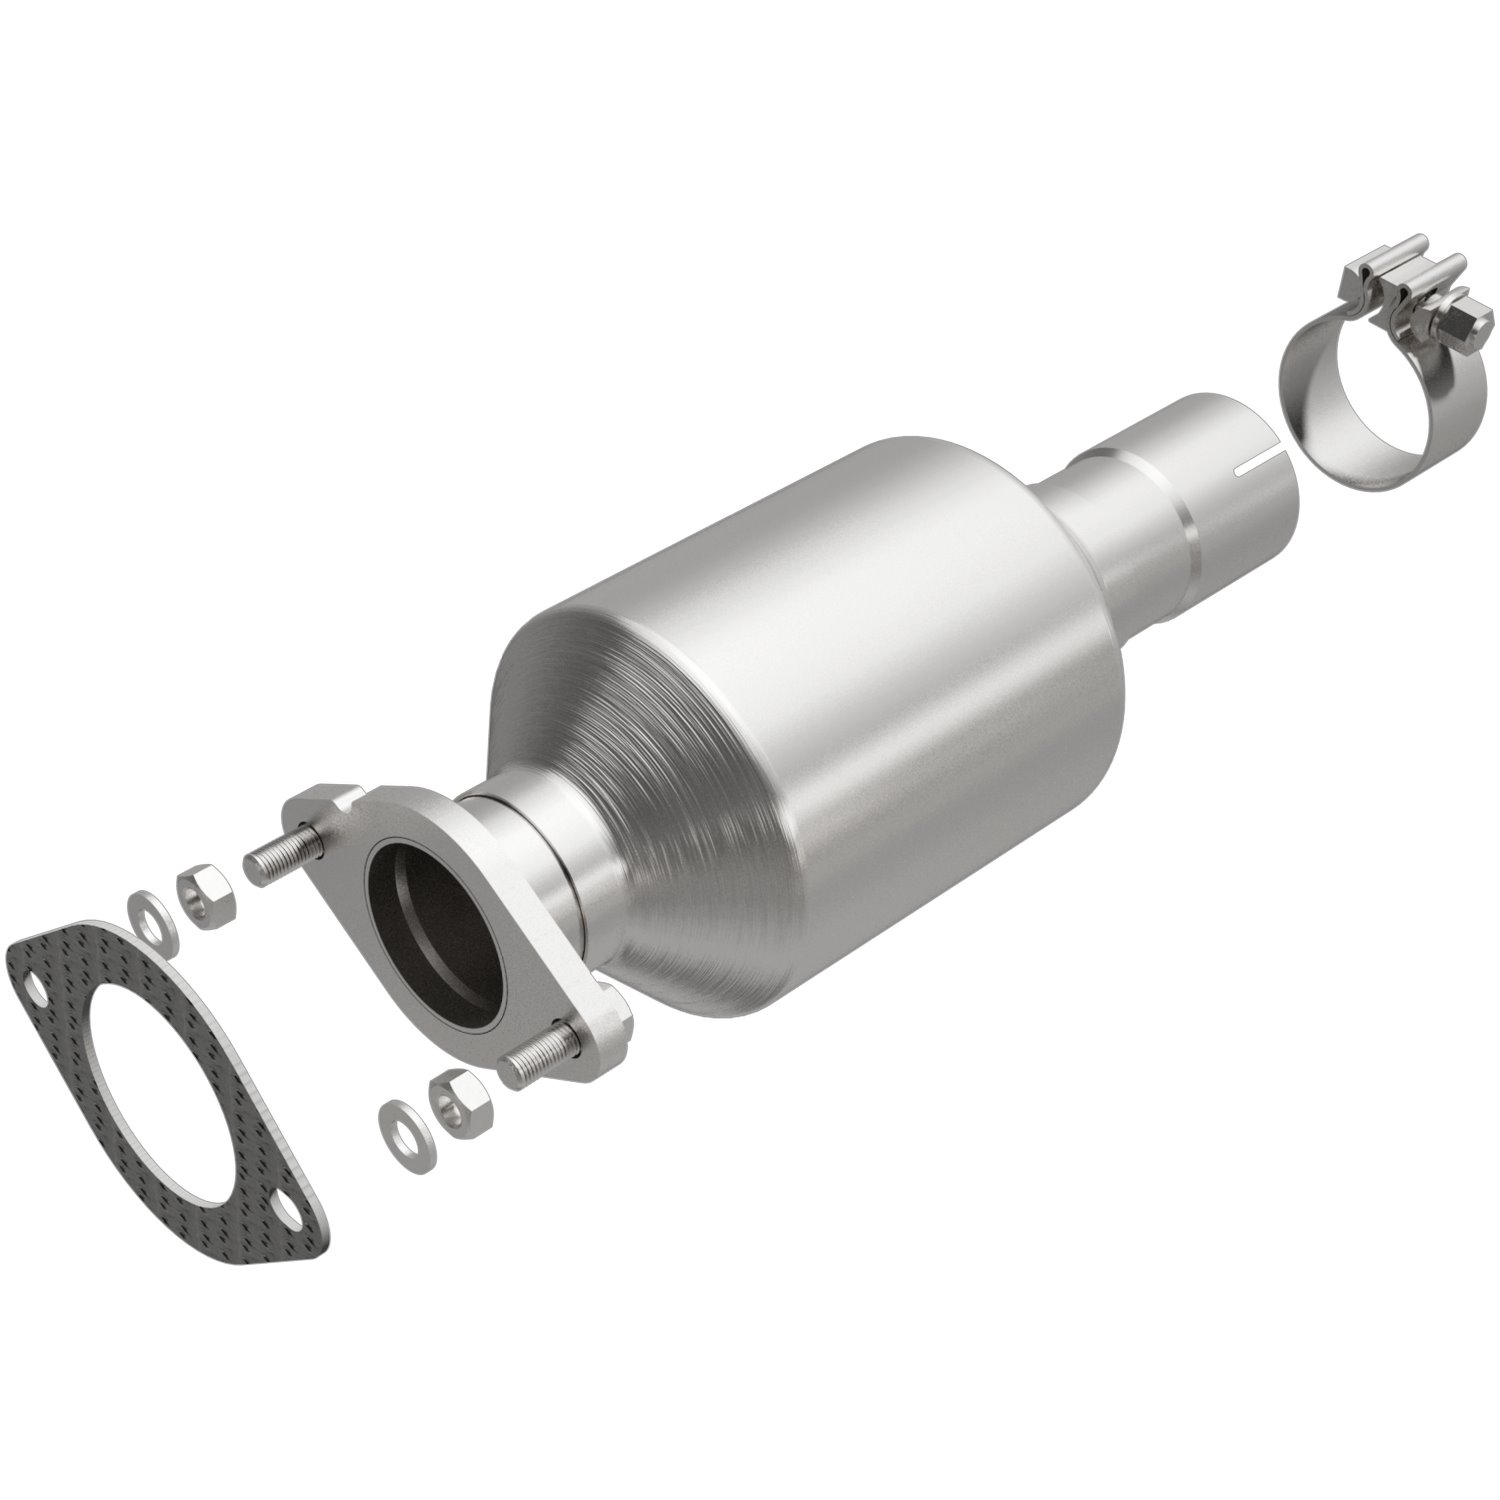 2013-2018 Ford C-Max OEM Grade Federal / EPA Compliant Direct-Fit Catalytic Converter